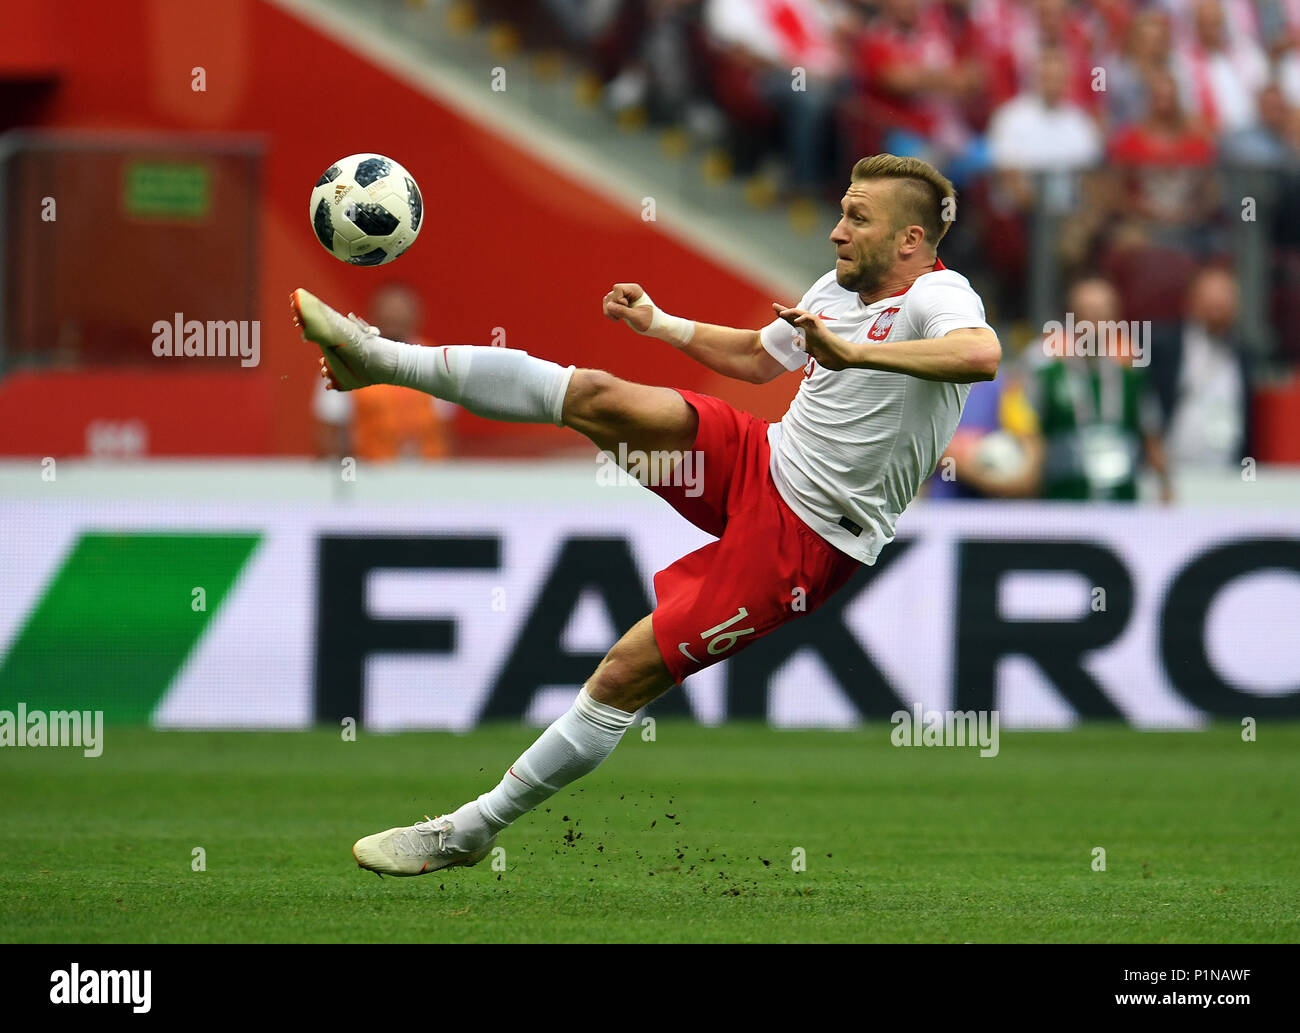 Warsaw, Poland. 12th June, 2018. Jakub Blaszczykowski of Poland competes during a friendly soccer match between Poland and Lithuania in Warsaw, Poland, on June 12, 2018. Poland won 4-0. Credit: Maciej Gillert/Xinhua/Alamy Live News Stock Photo